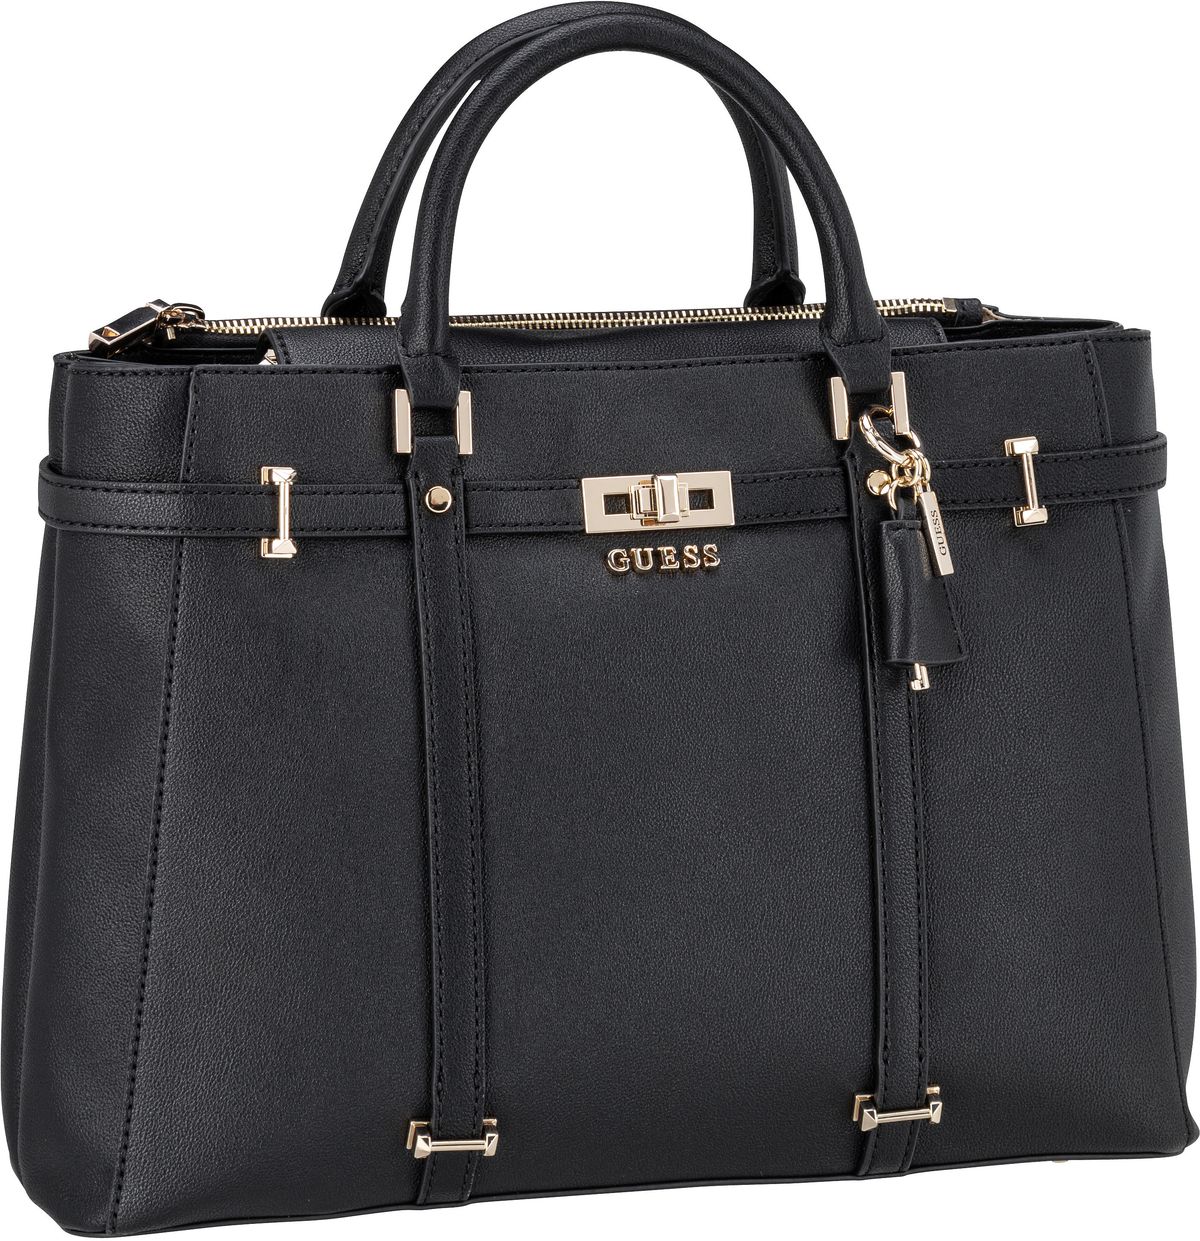 Guess Emilee Society Carryall  in Black (9.2 Liter), Handtasche